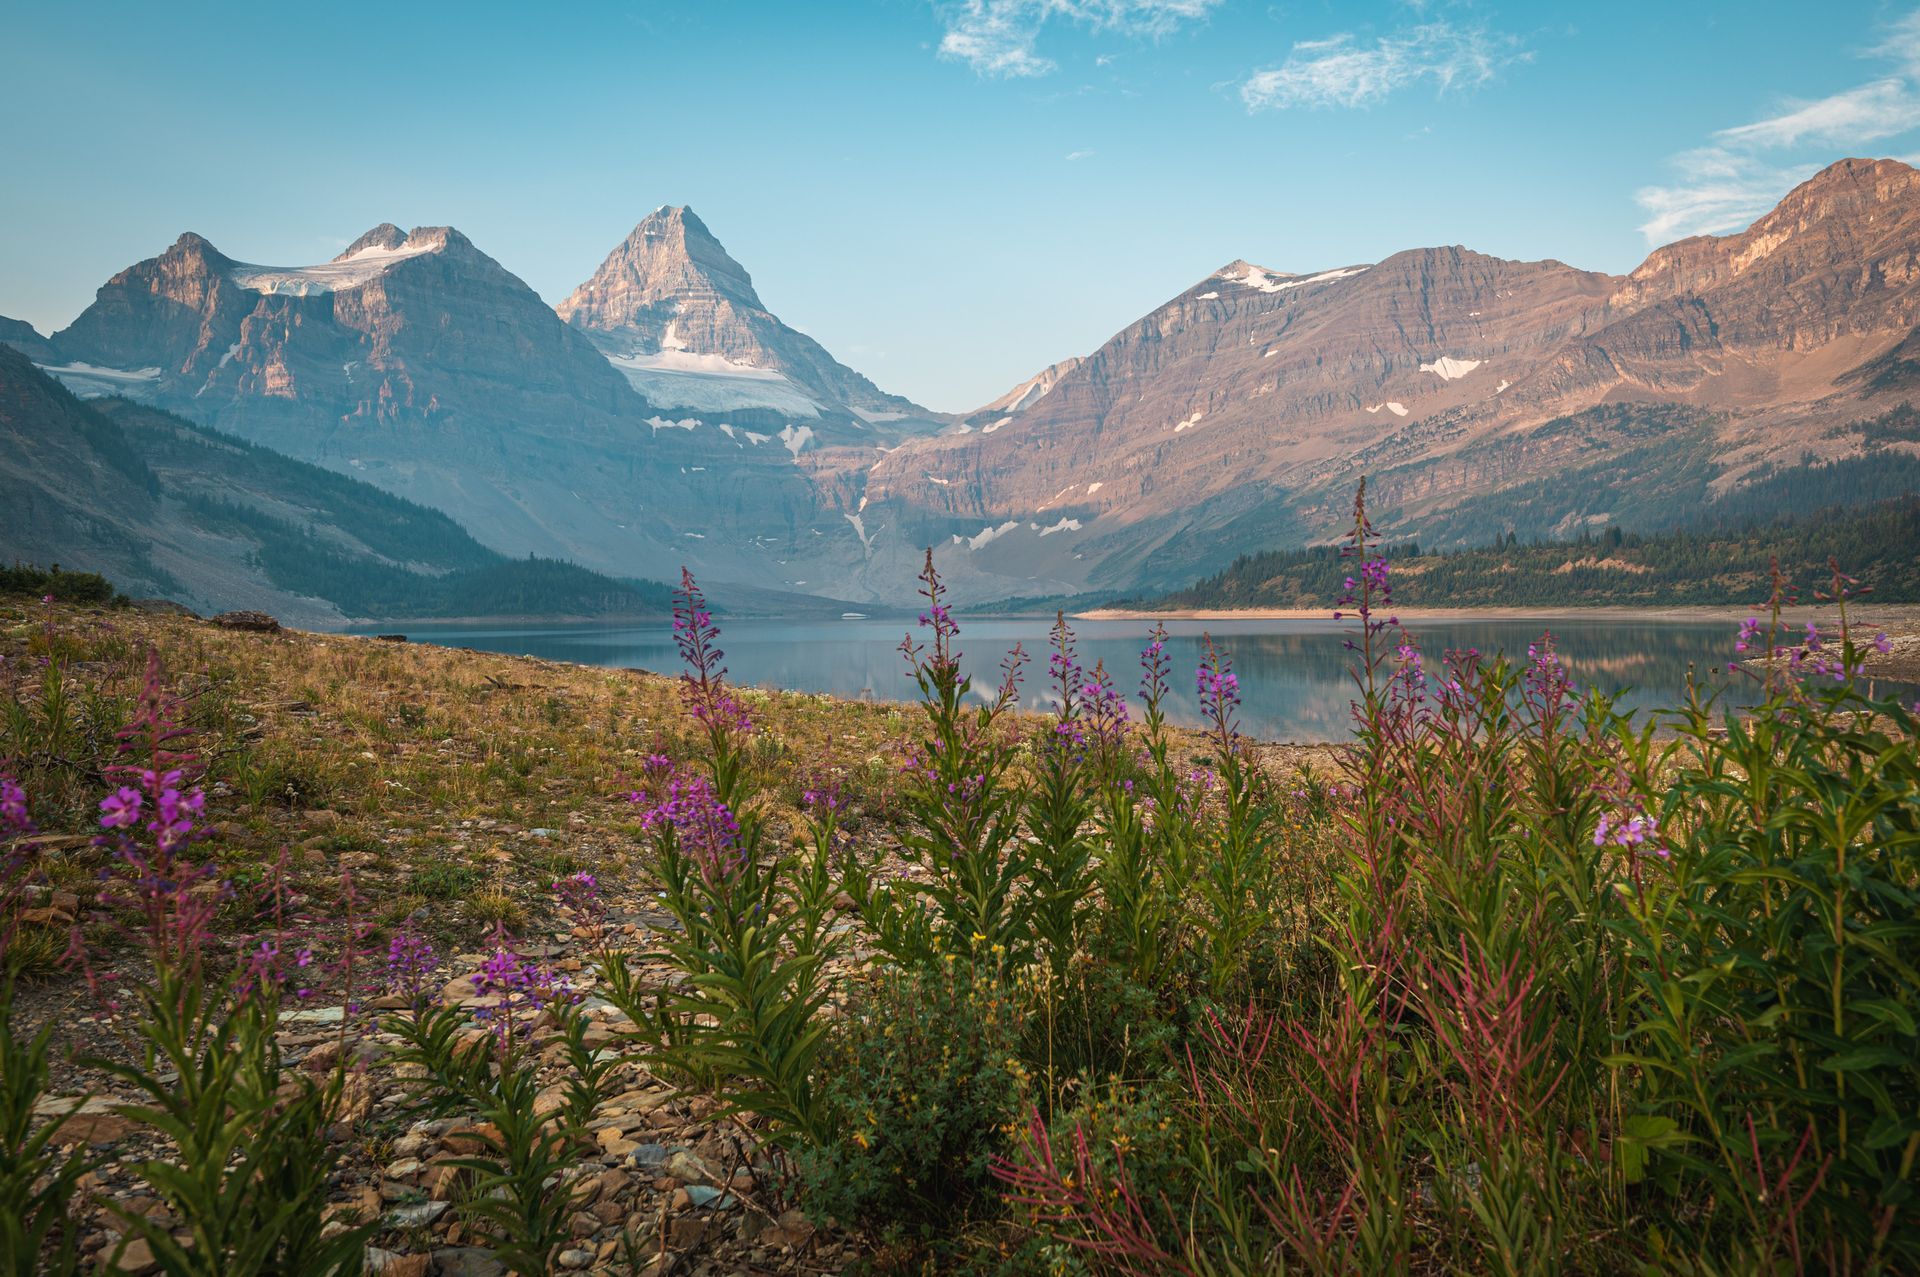 View of Magog lake and mount Assiniboine on sunrise